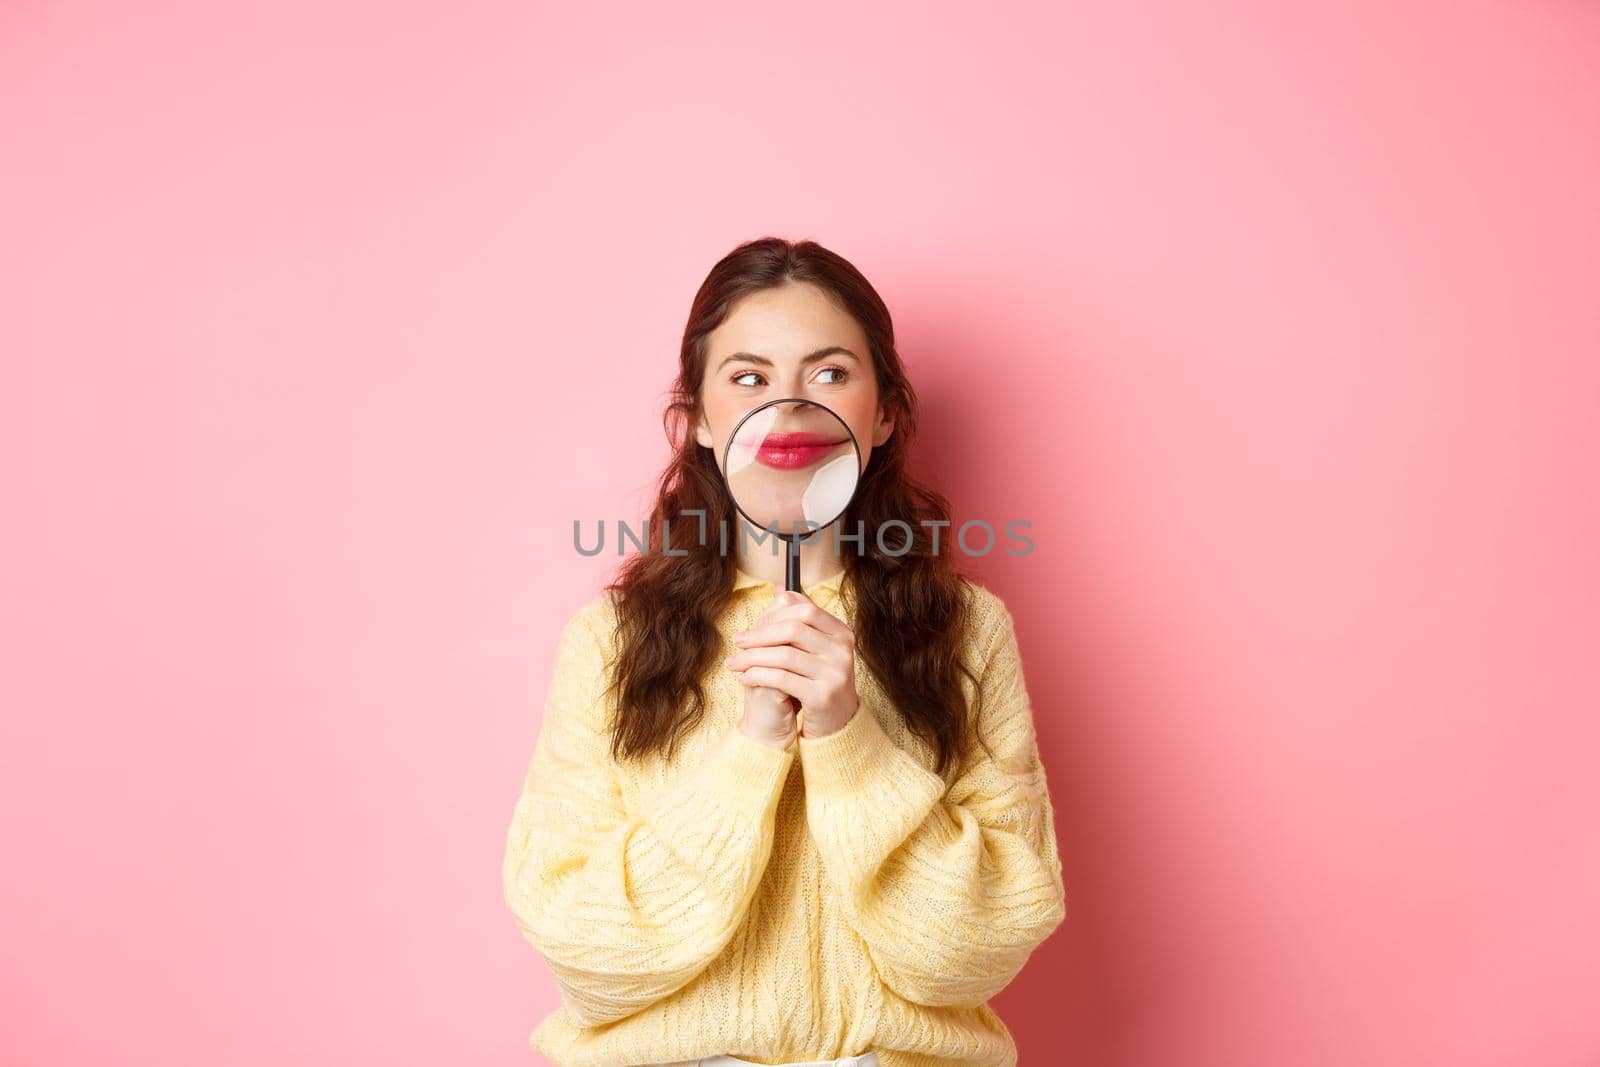 Image of coy attractive girl thinking of something interesting, showing her smile with magnifying glass near lips, standing against pink background, looking aside at promotional text.